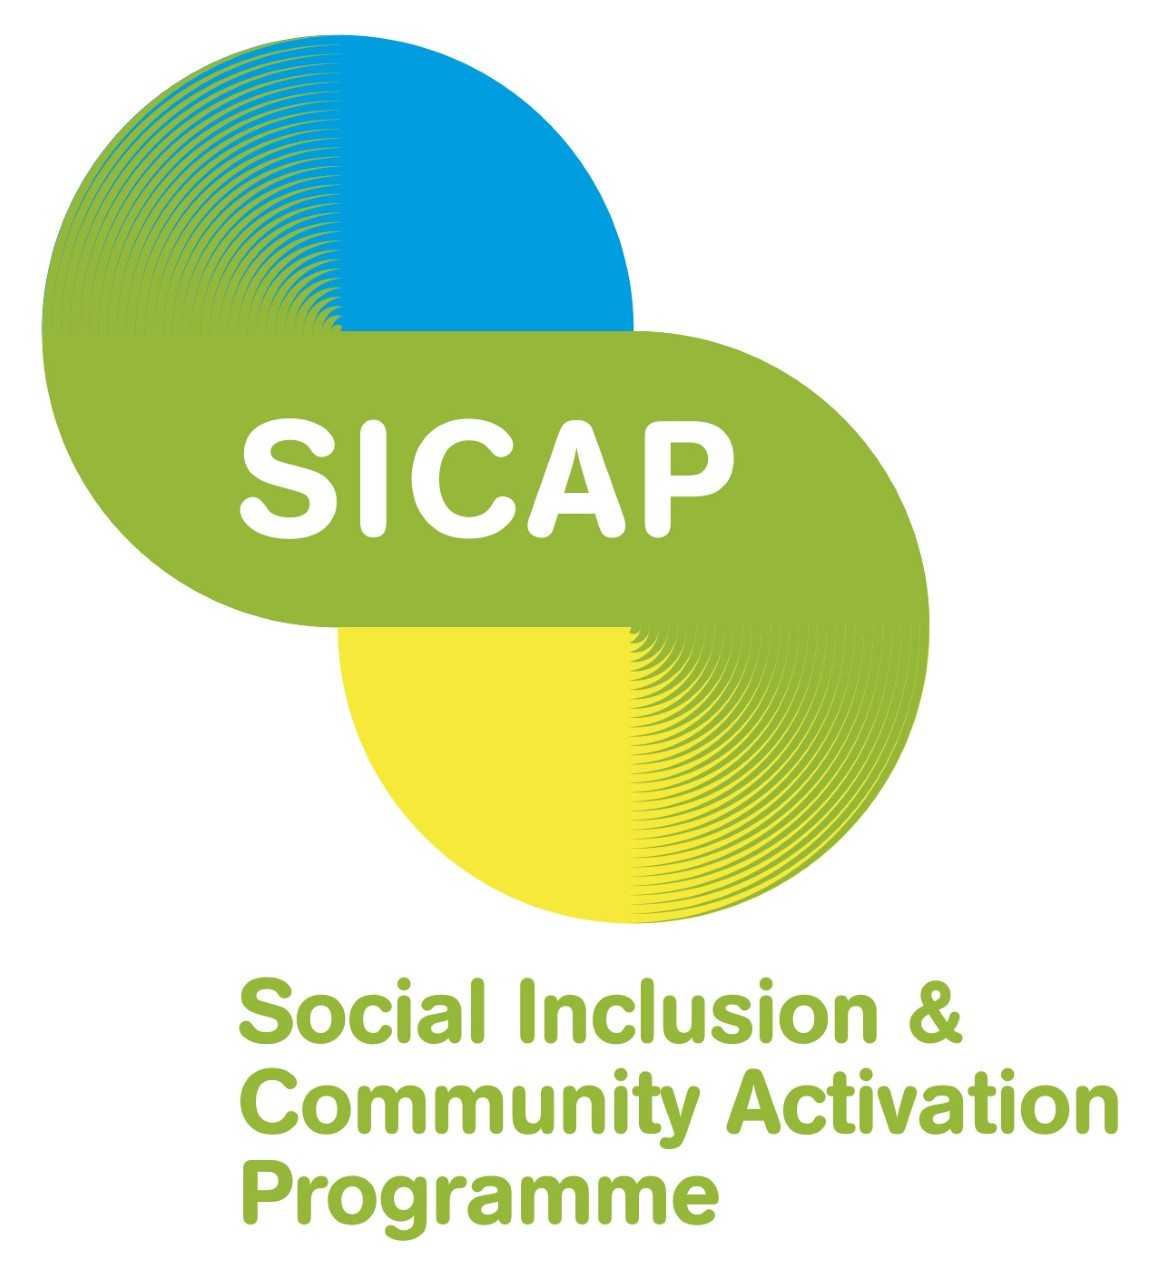 The Social Inclusion and Community Activation Programme